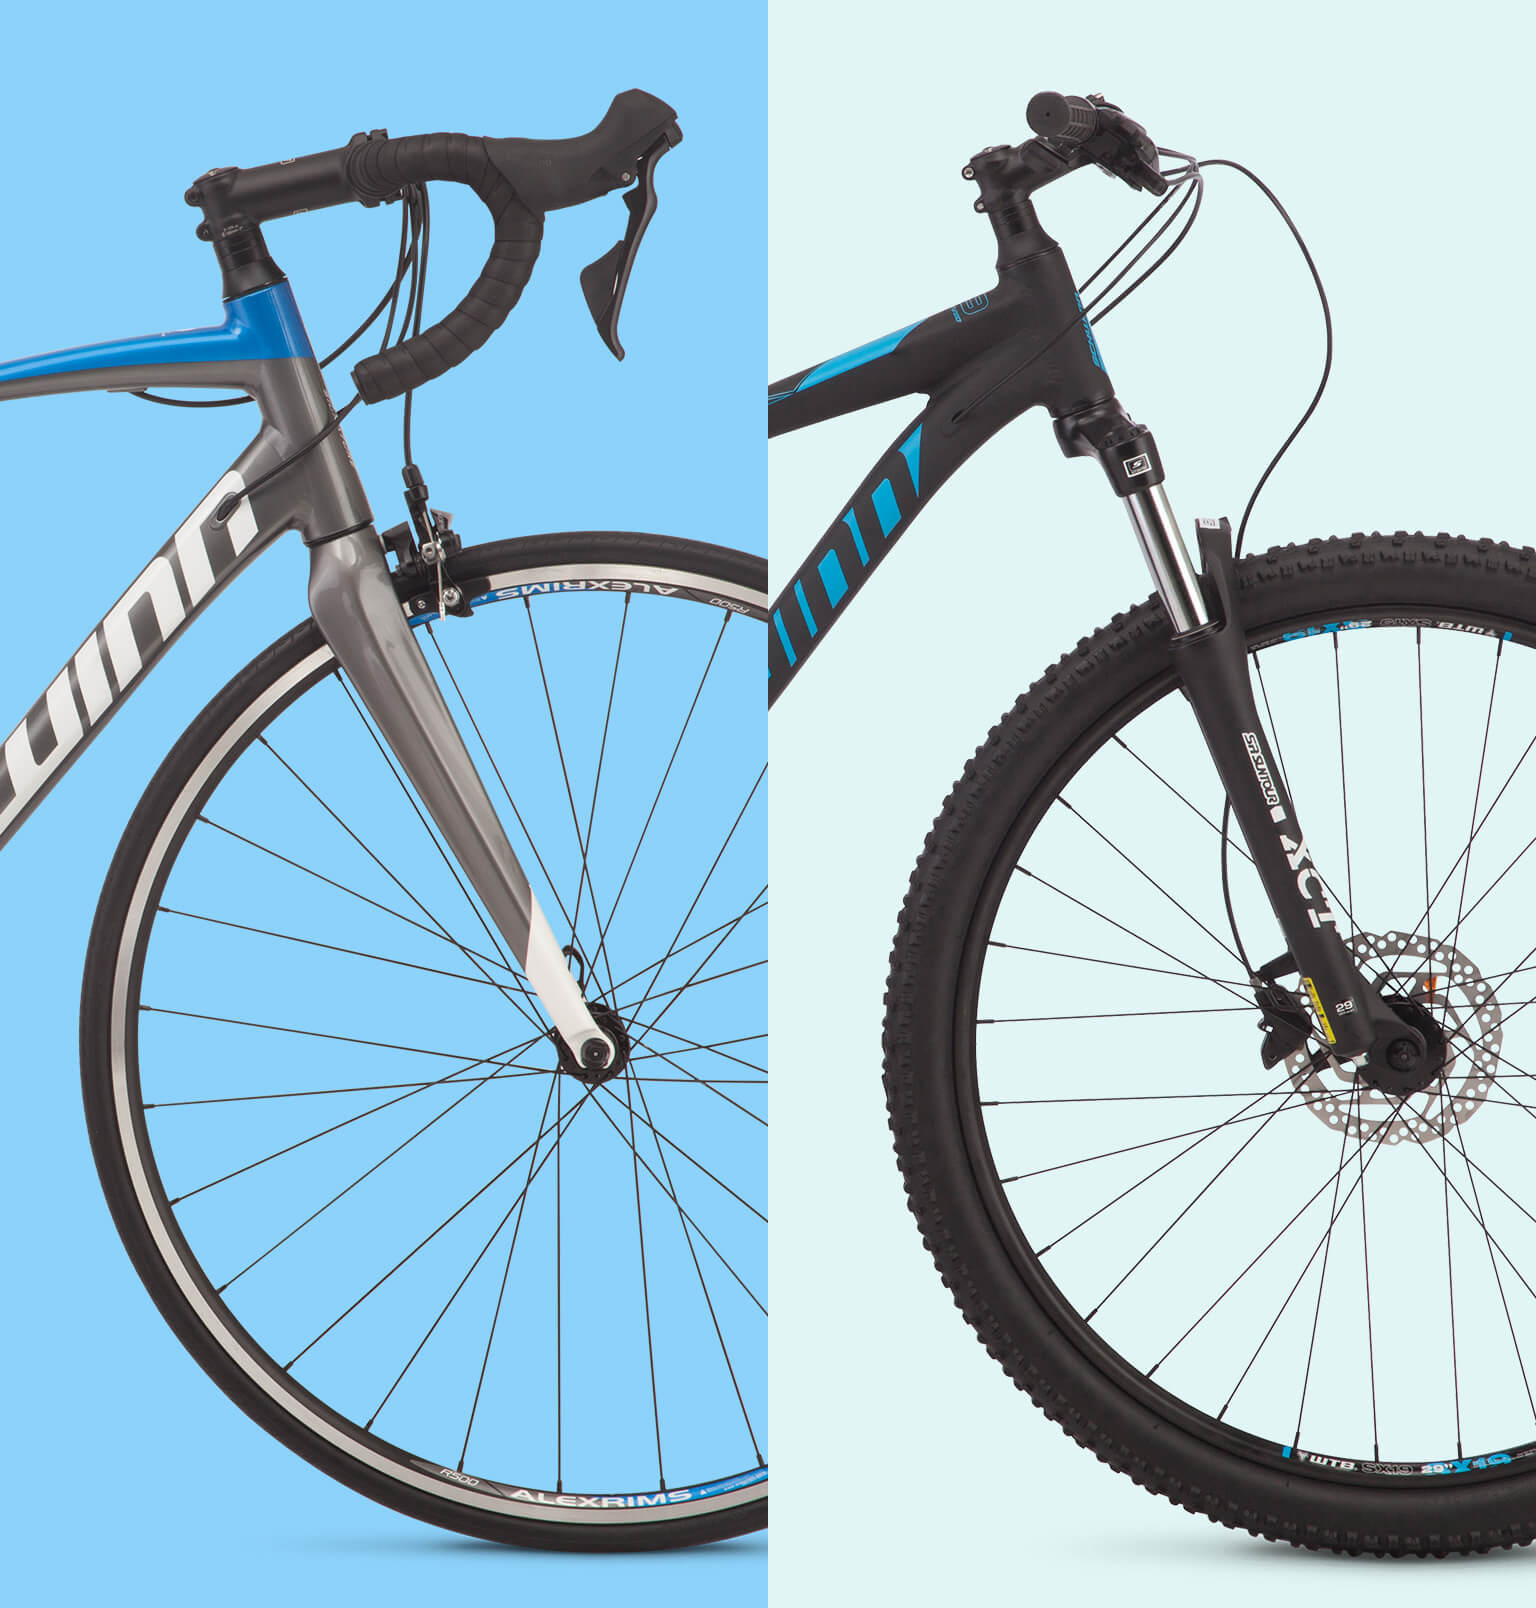 Road Bikes vs Mountain Bikes Whats the Difference?